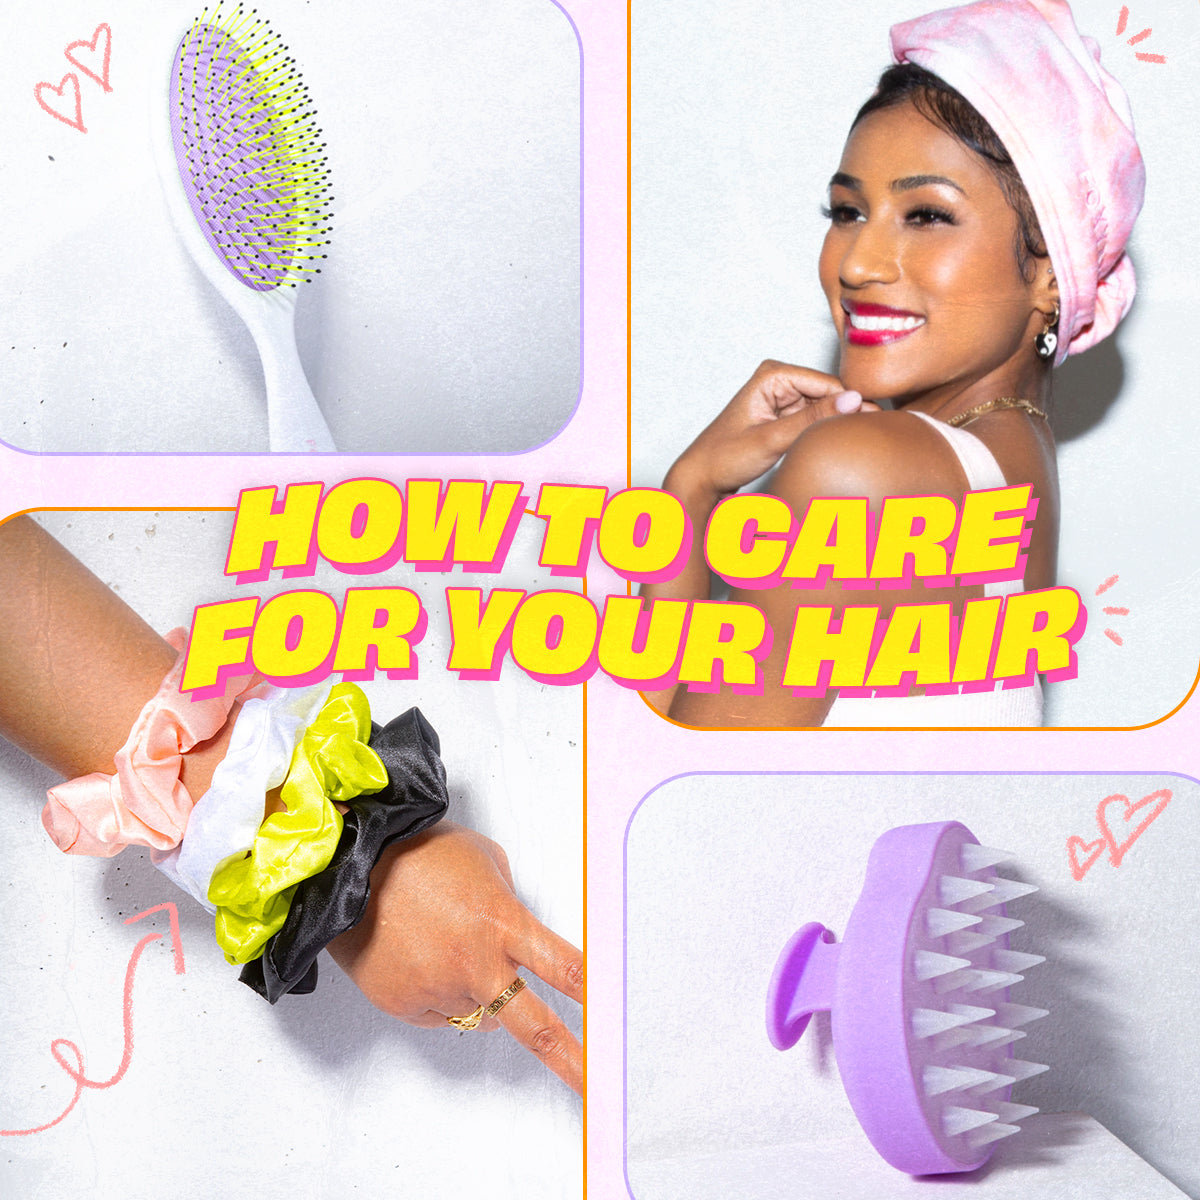 How to Care for Your Hair featured image